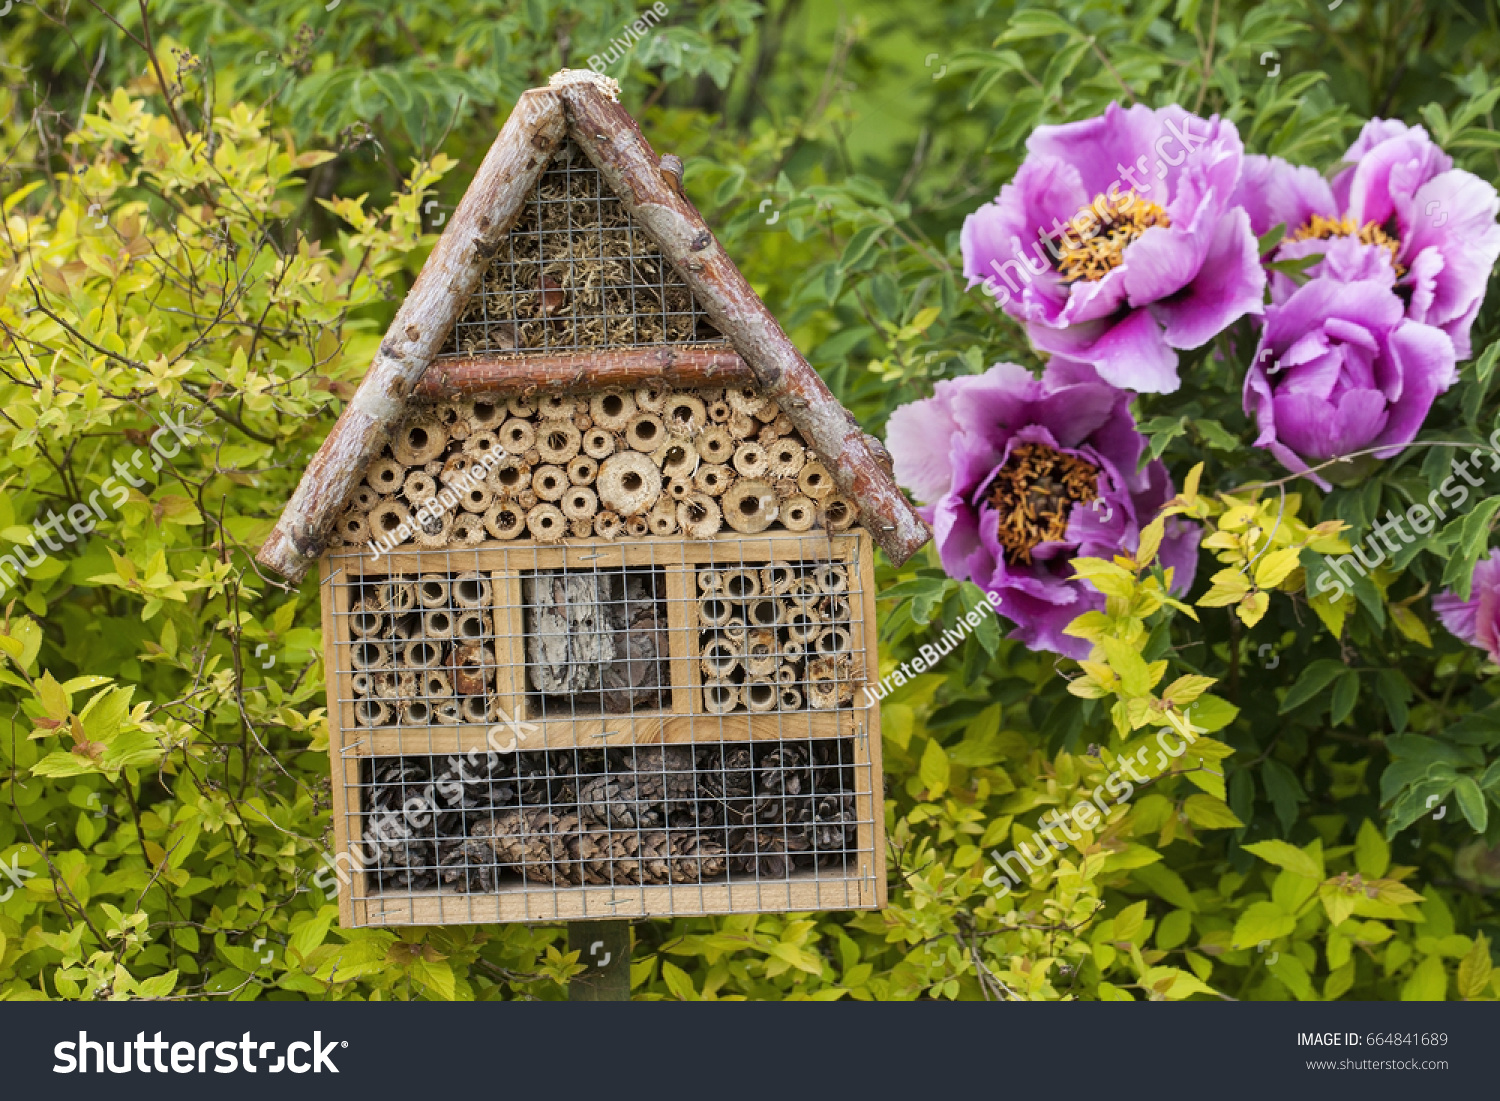 Insect house in a summer garden #664841689